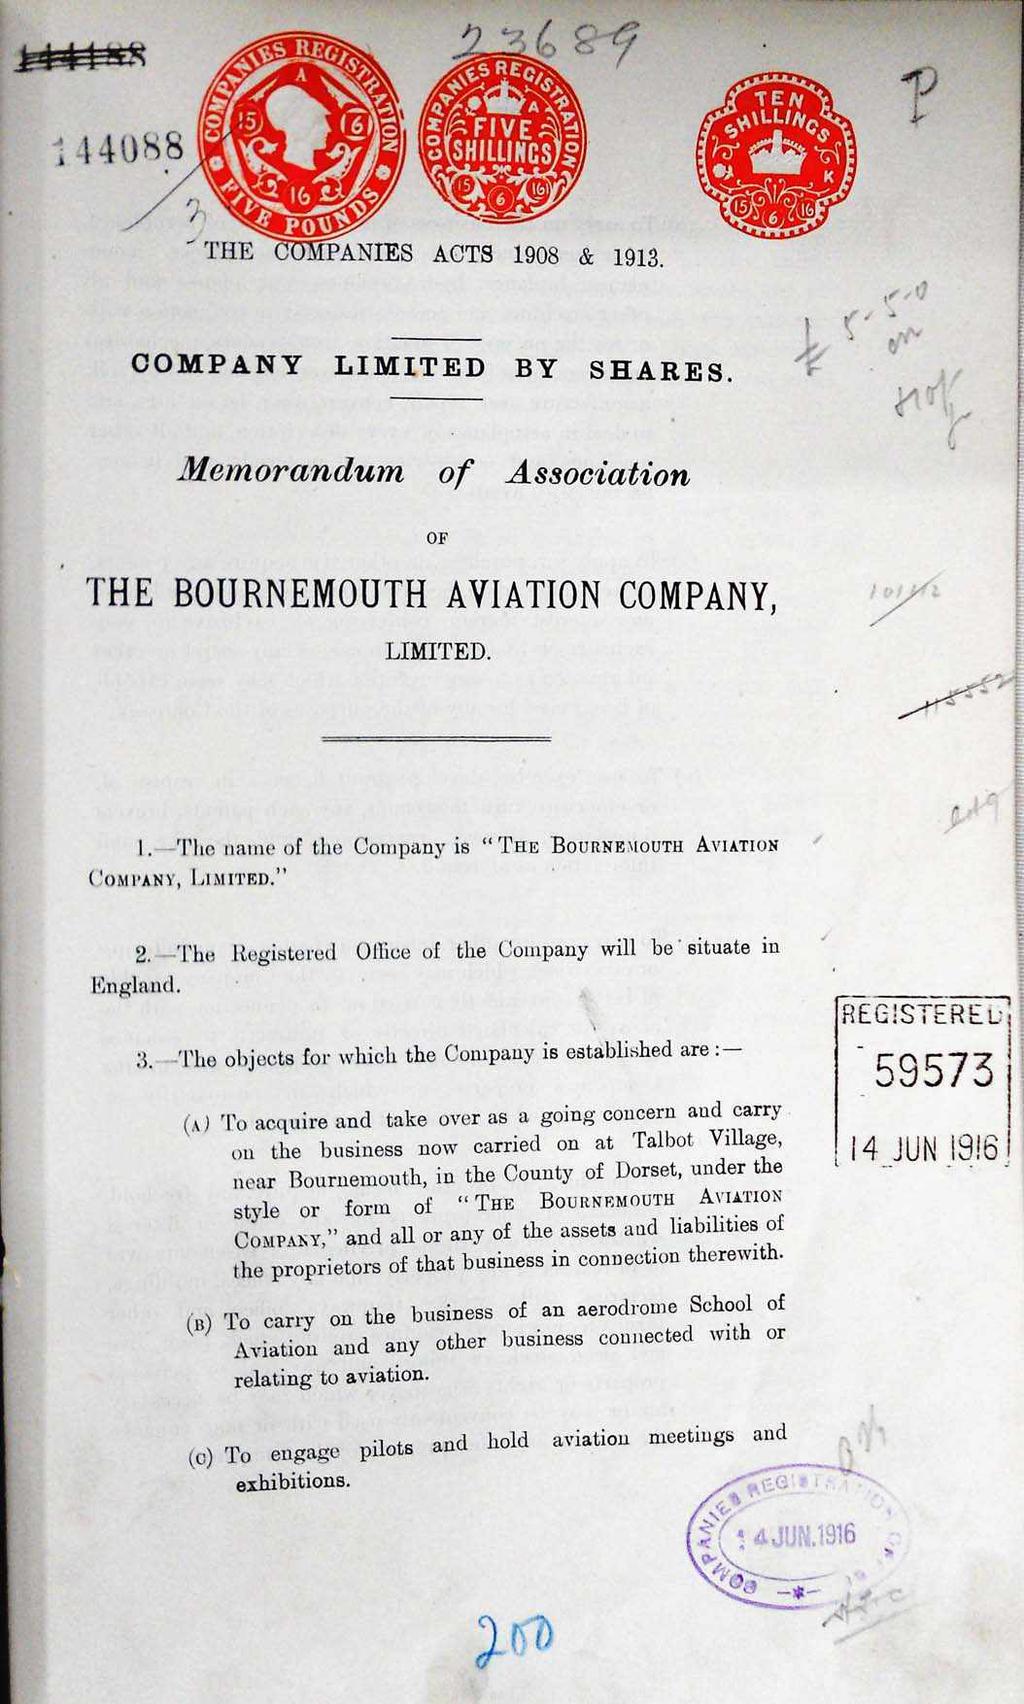 Throughout 1916 the Company was